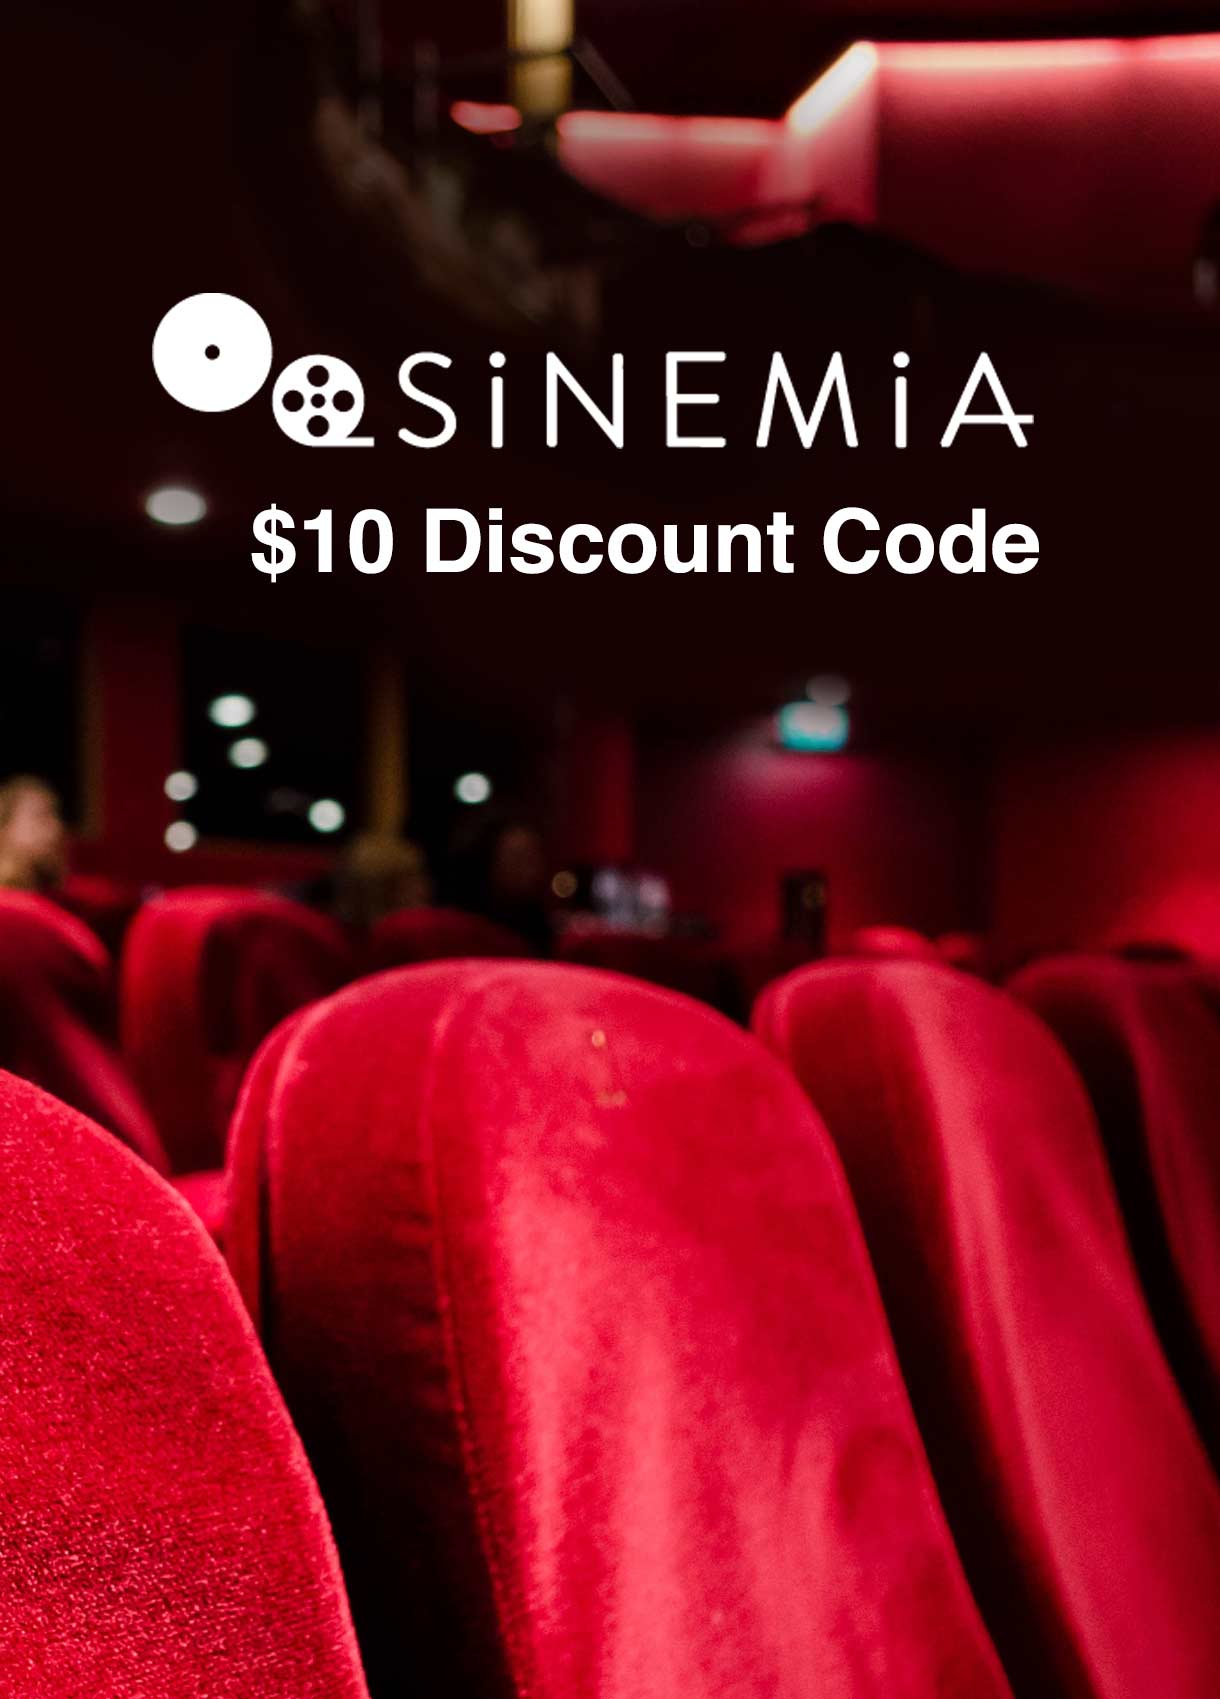 Use Sinemia Promo Code for a $10 Movie Theater Discount